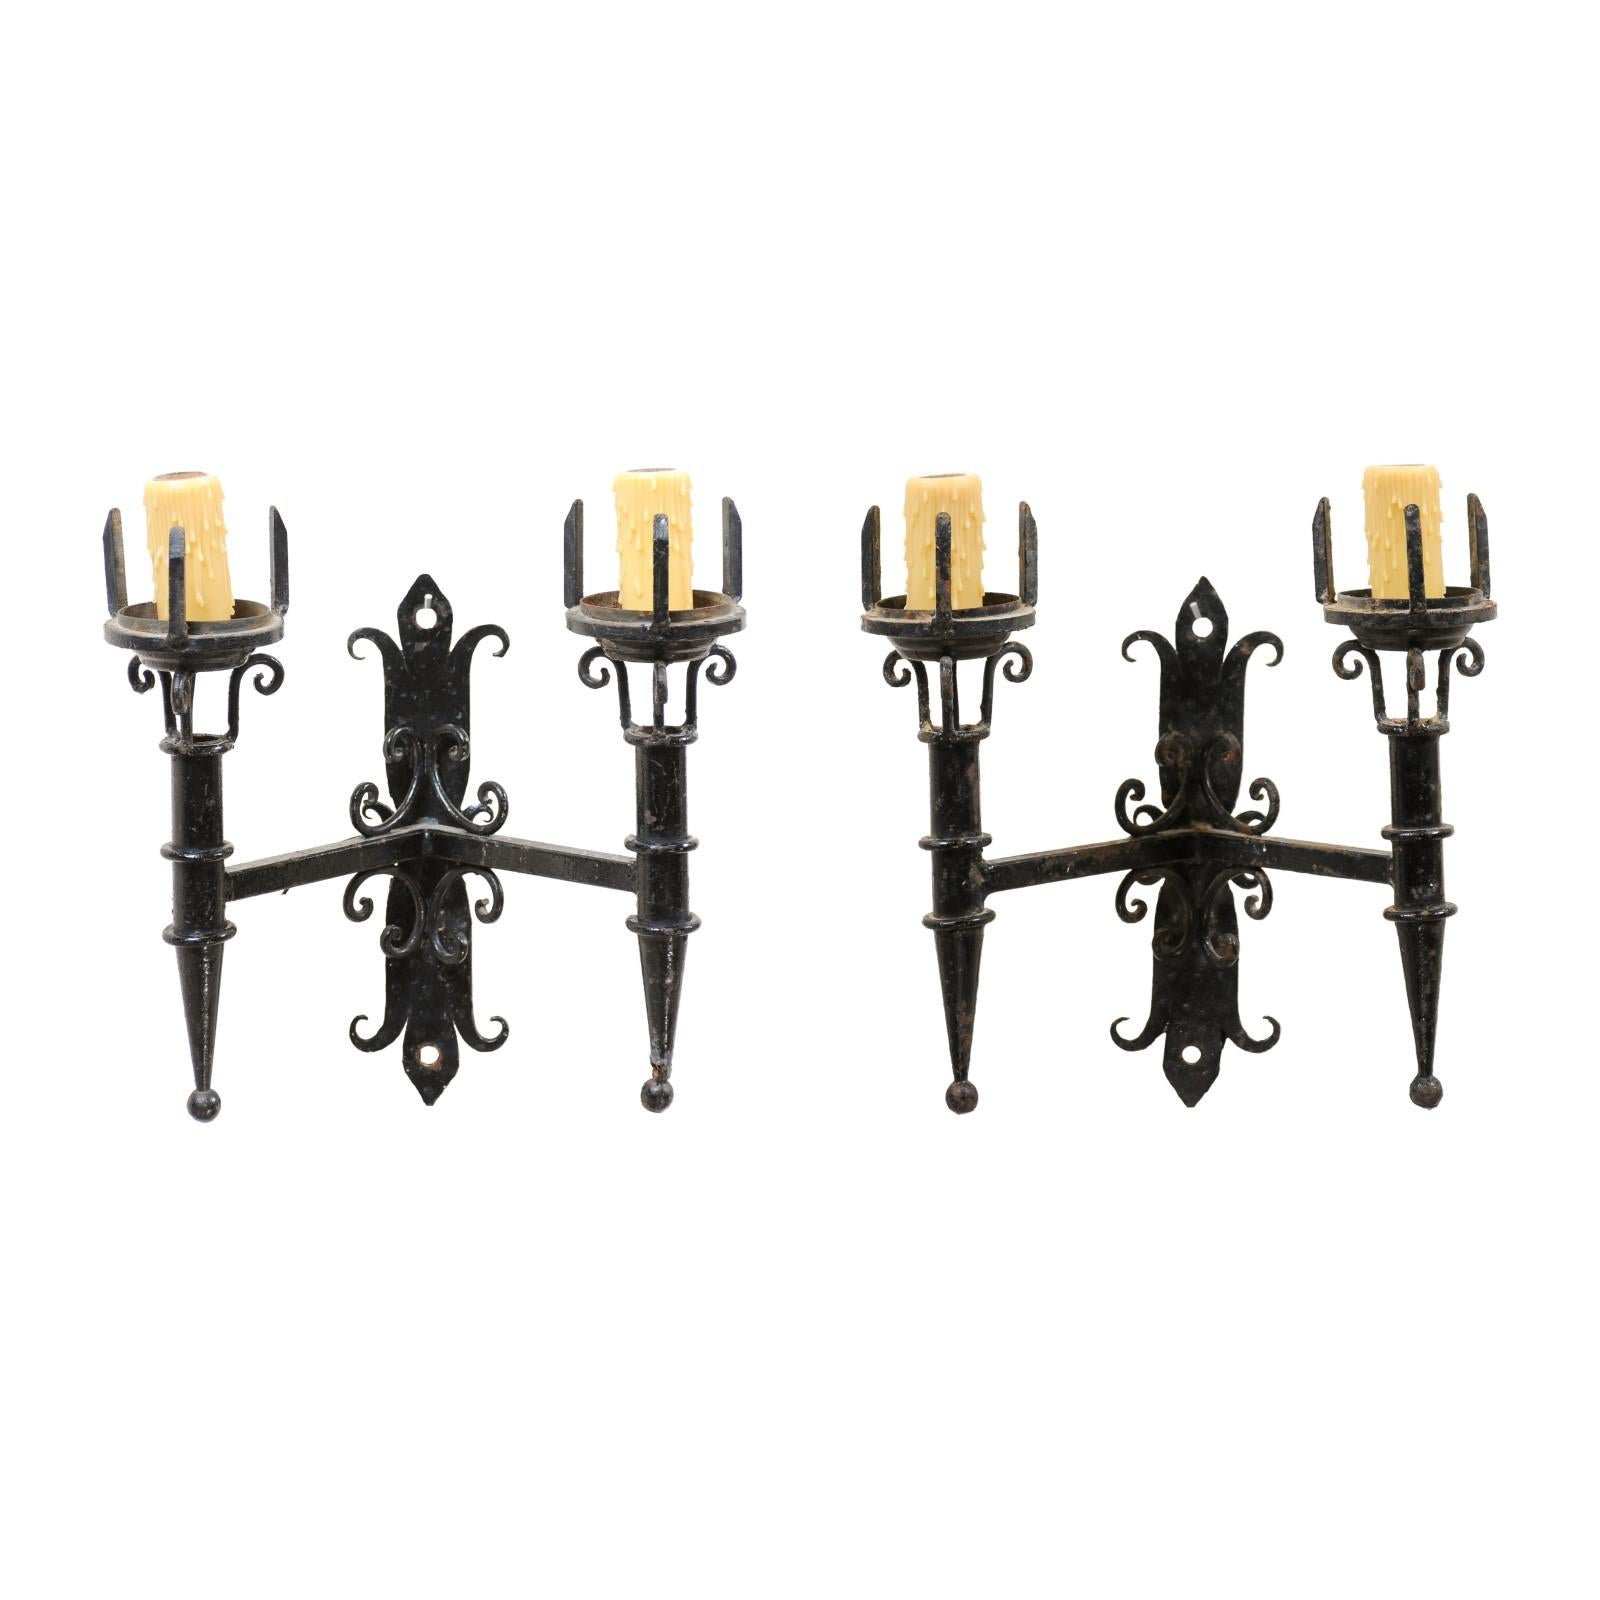 Pair of Black Painted Iron Sconces with Scroll Detail & 2 Lights, 20th Century For Sale